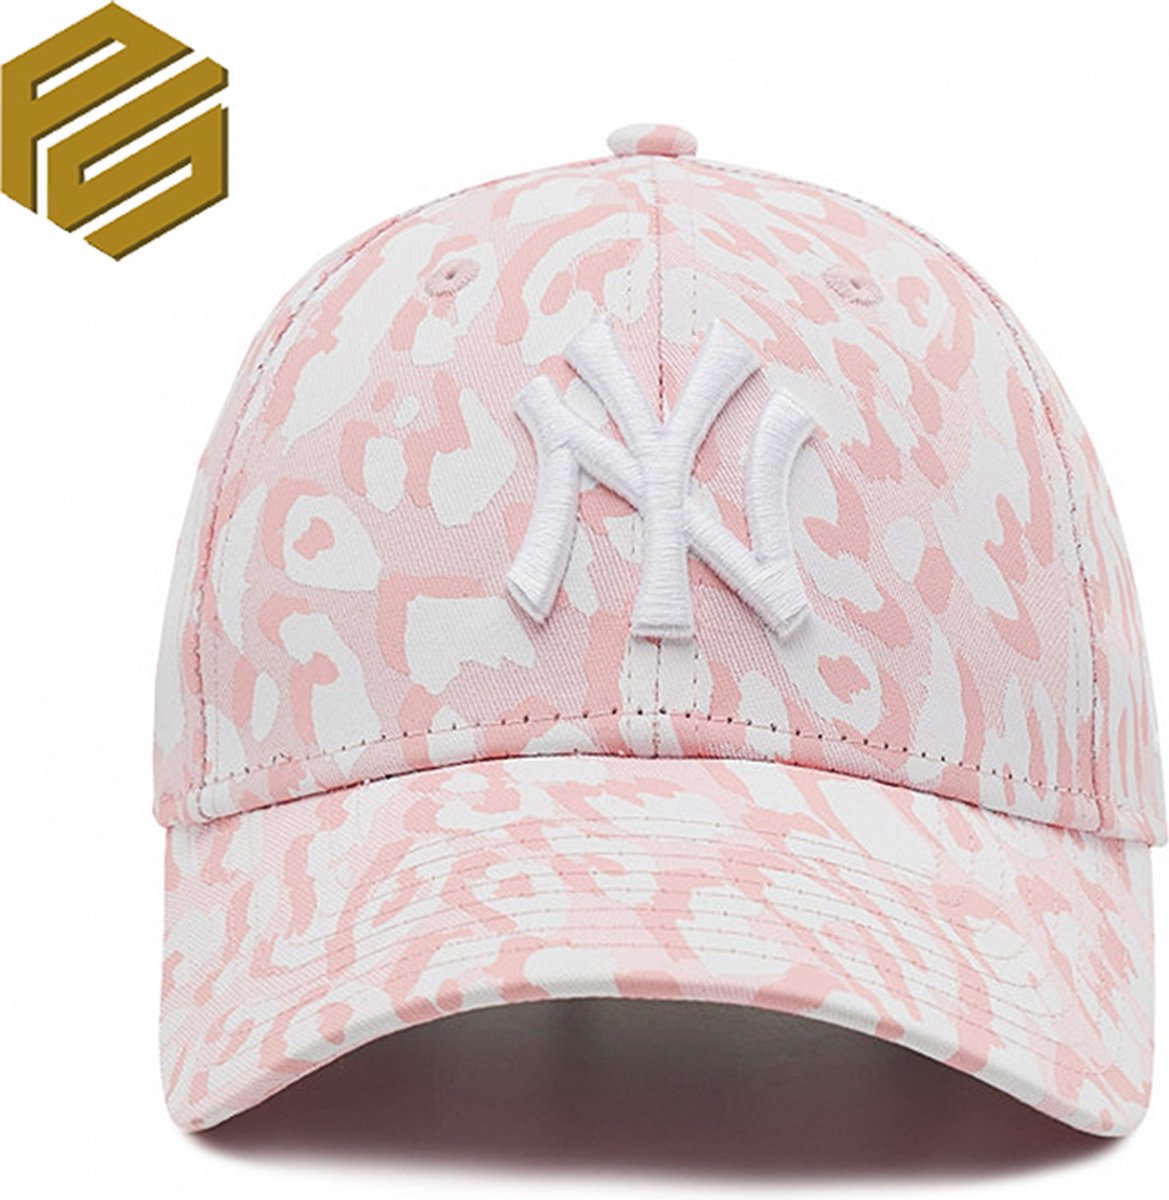 New York Yankees Leopard Print Womens Pink 9FORTY Adjustable Cap